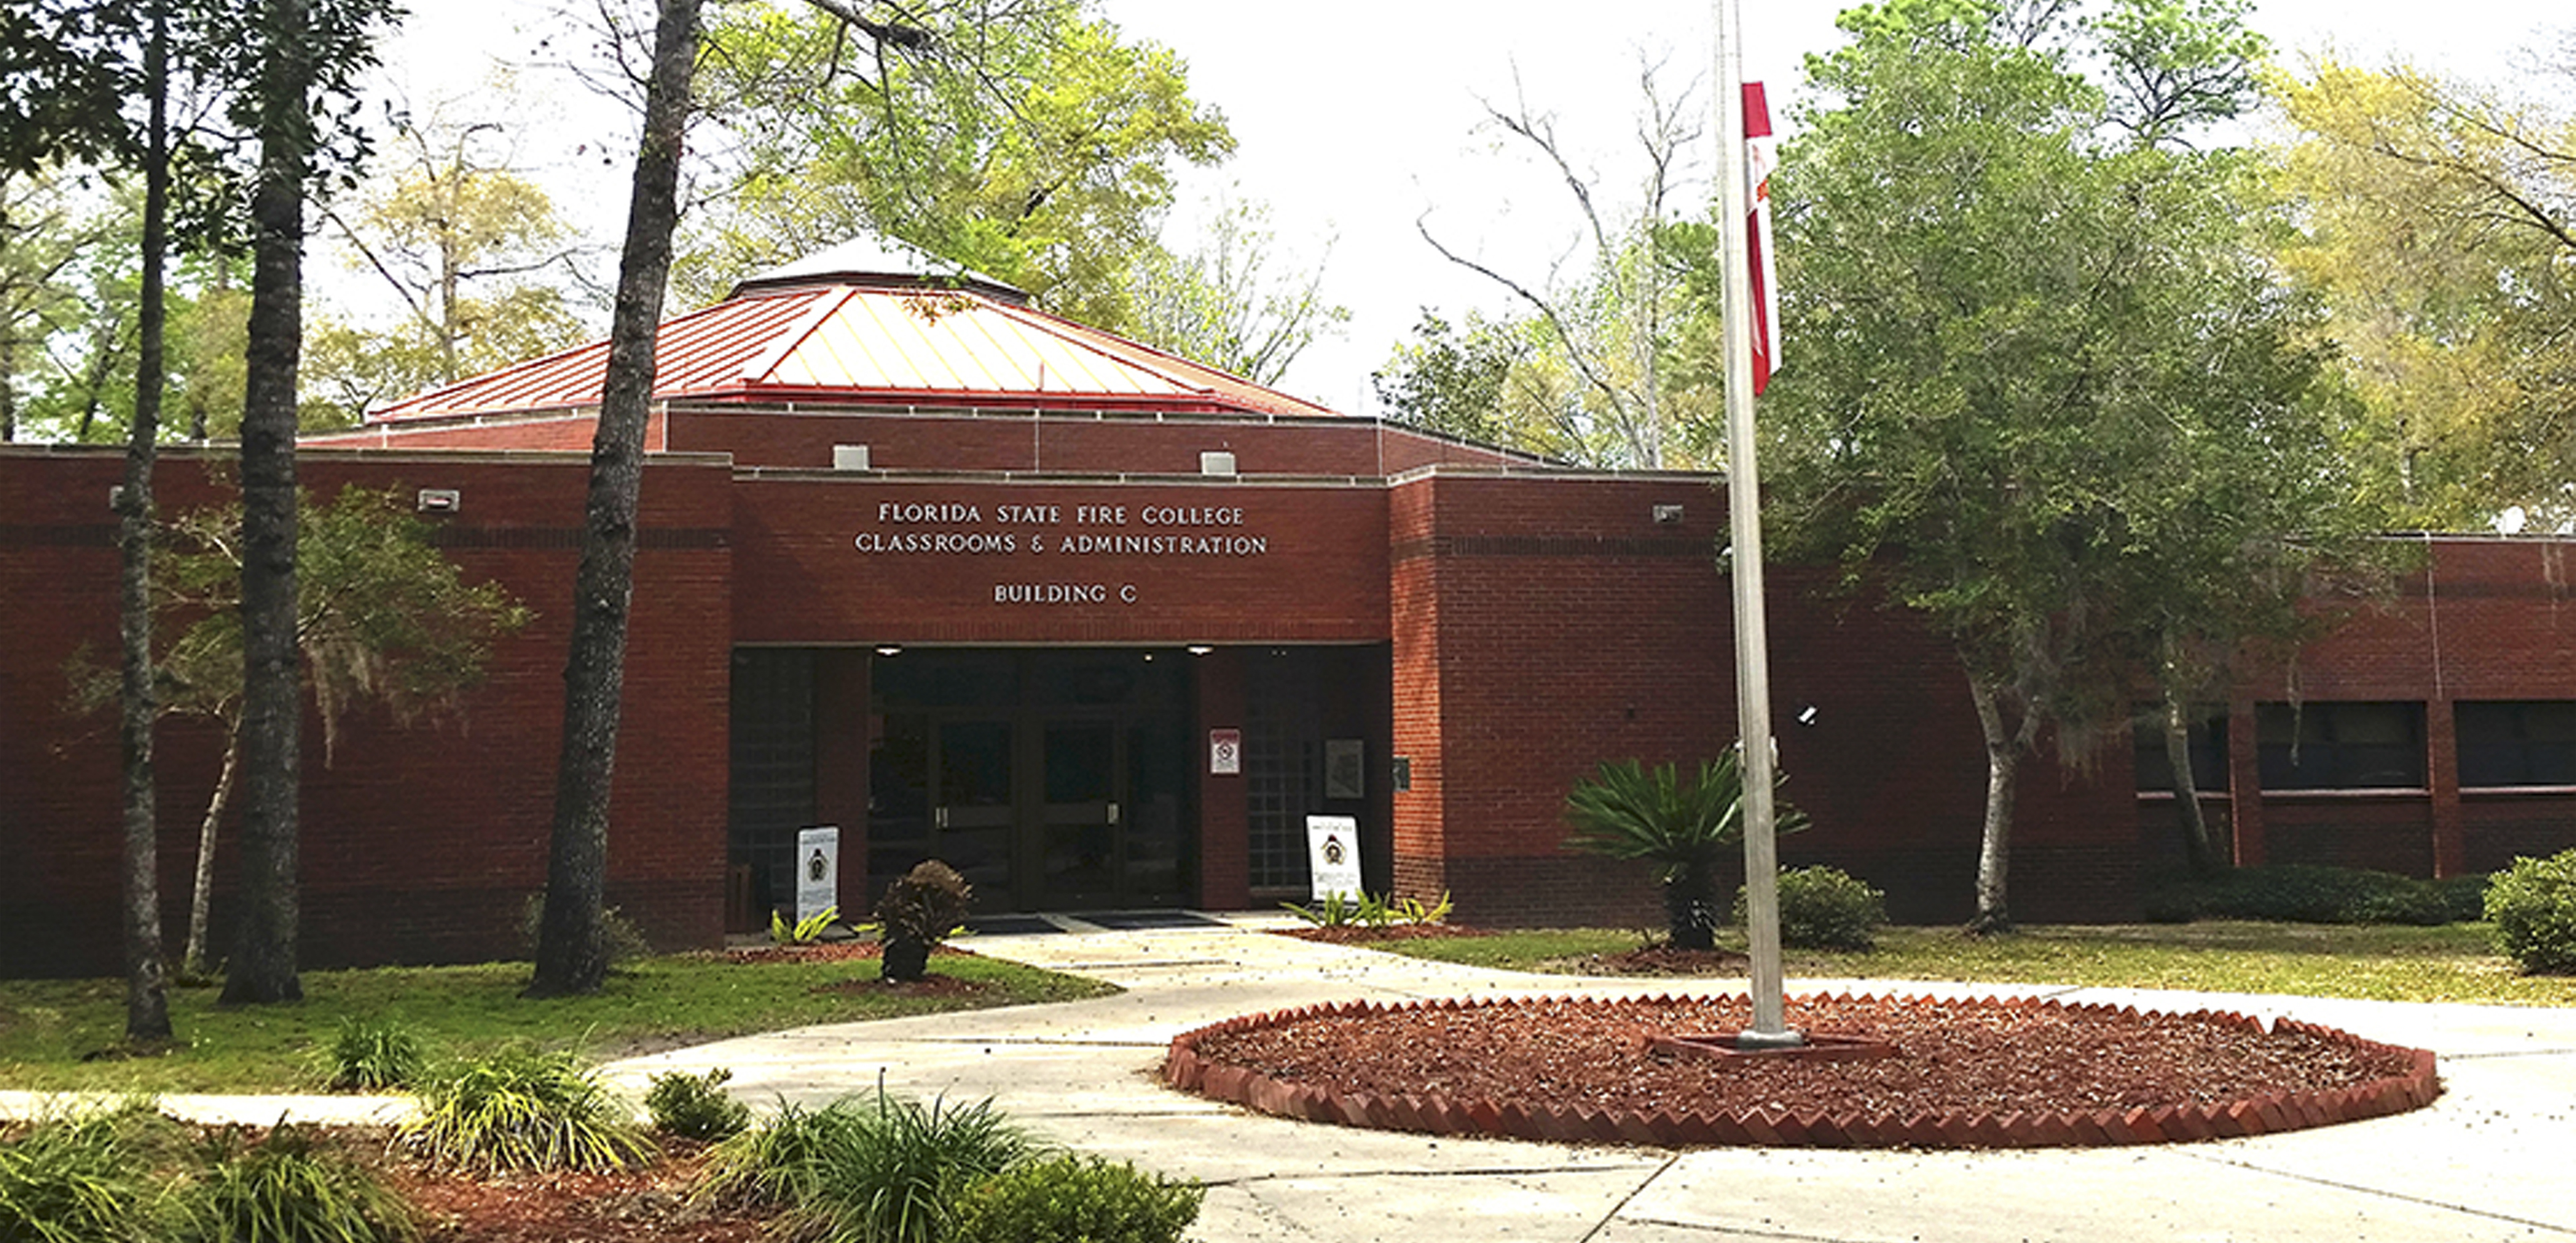 Florida State Fire College Administration building